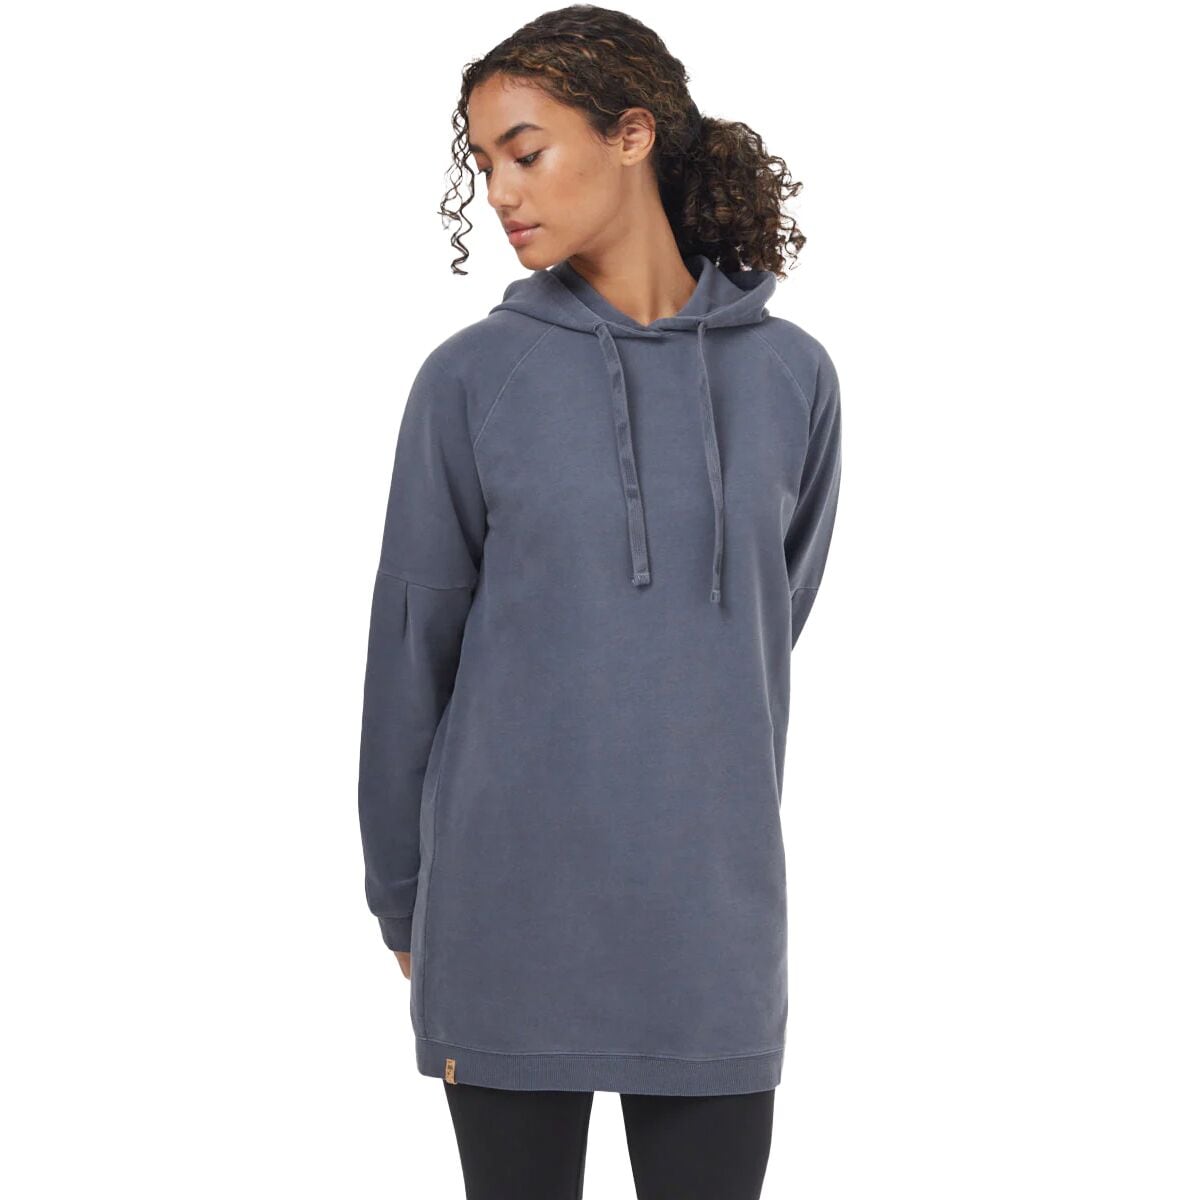 Oversized French Terry Hoodie Dress - Women